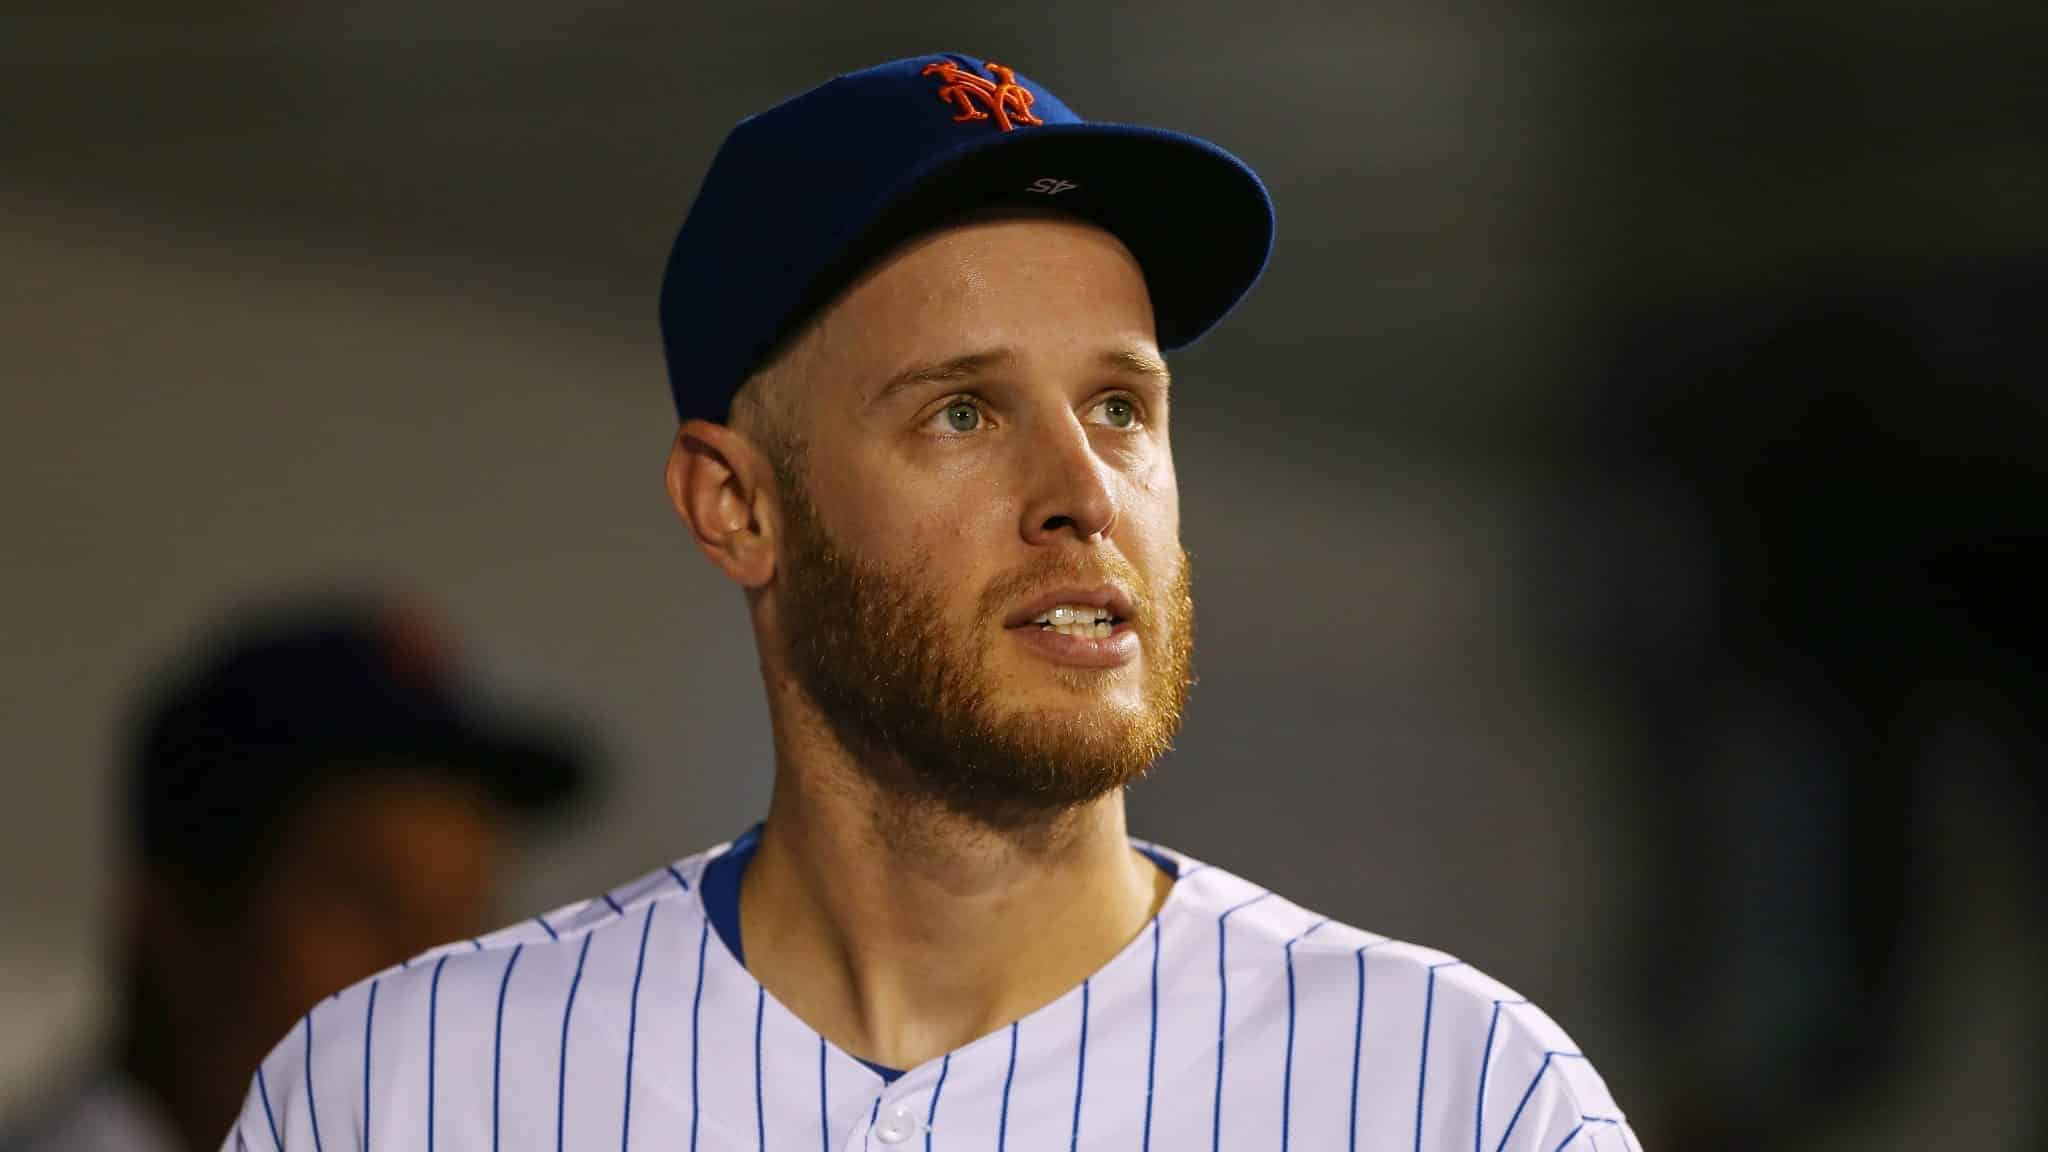 NEW YORK, NY - SEPTEMBER 15: Pitcher Zack Wheeler #45 of the New York Mets looks on from the dugout during the seventh inning of a game against the Los Angeles Dodgers at Citi Field on September 15, 2019 in New York City.